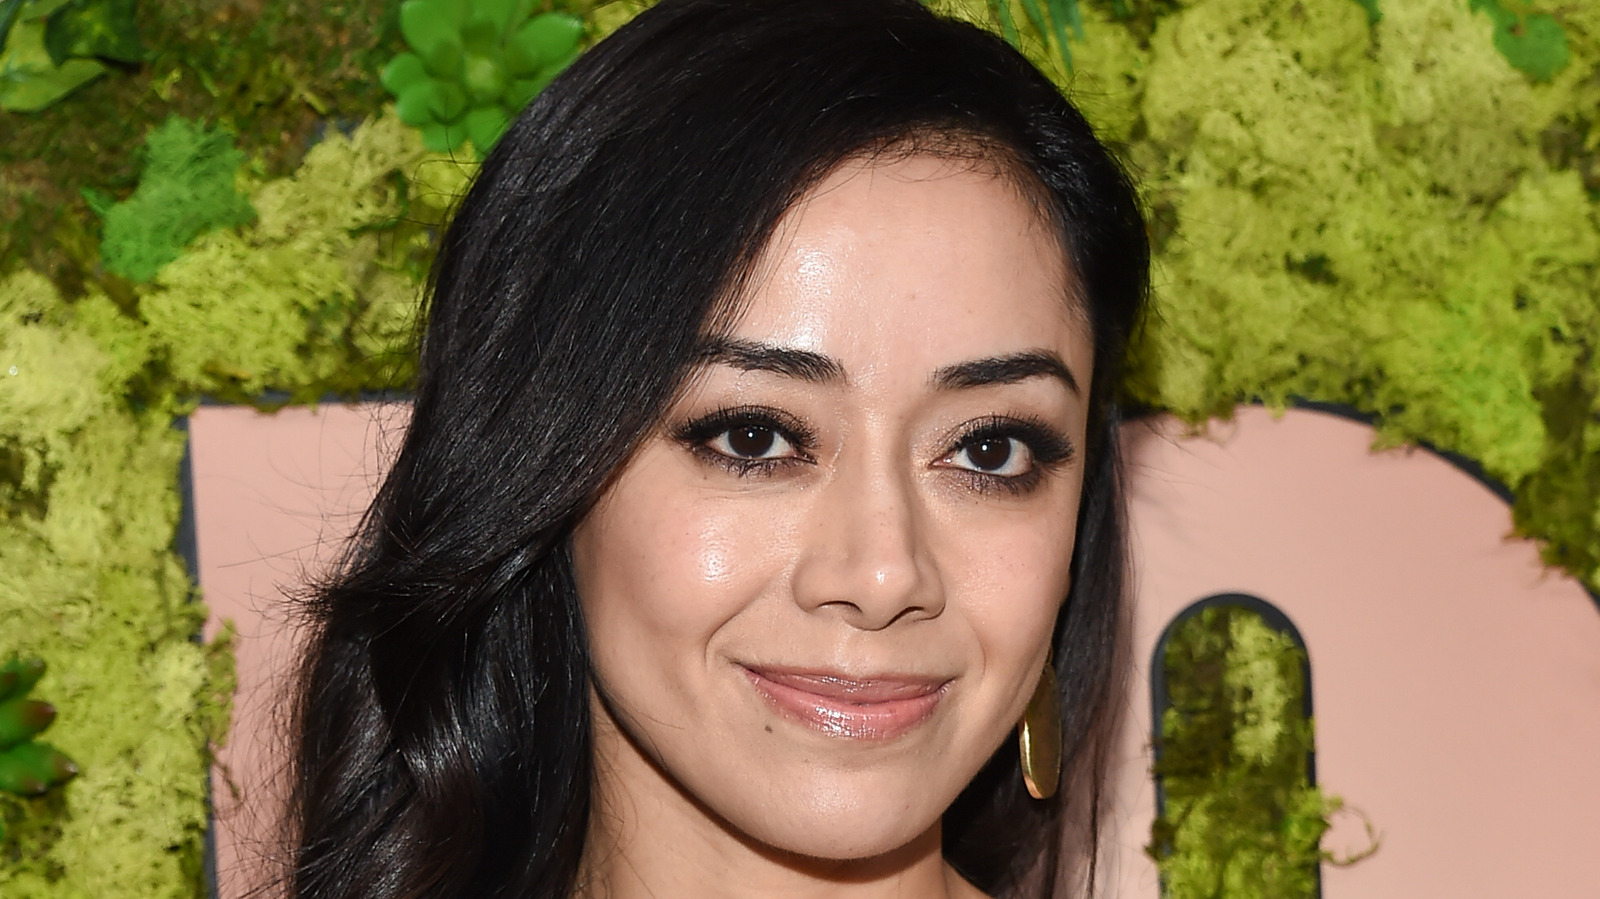 Aimee Garcia Reveals The Unusual Connection Between Her Lucifer And MODOK Characters